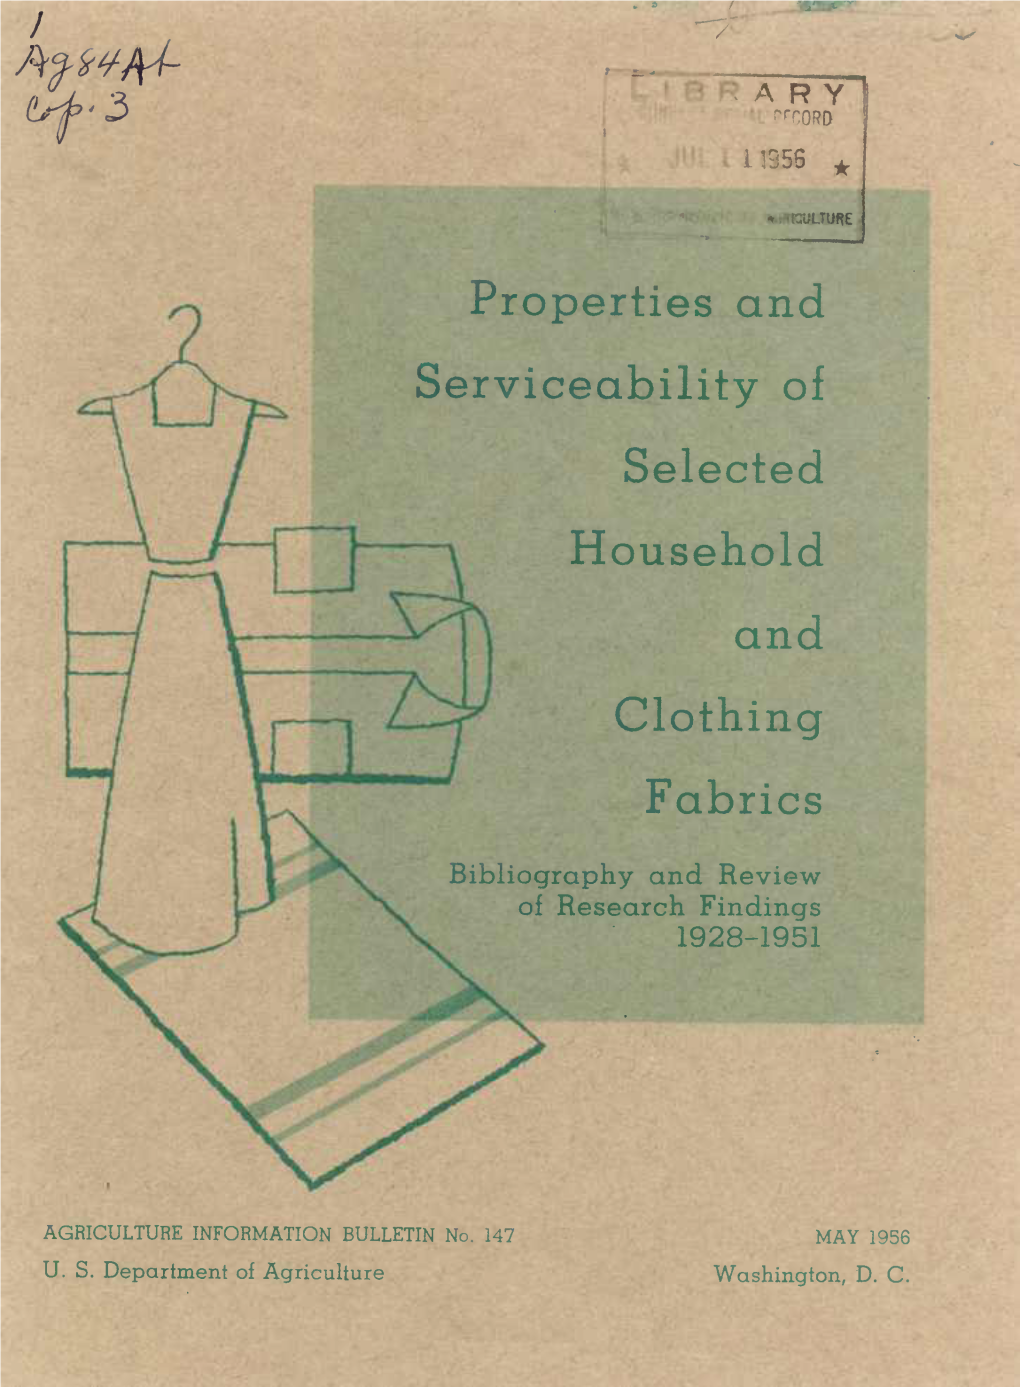 Properties and Serviceability of Selected Household and Clothing Fabrics